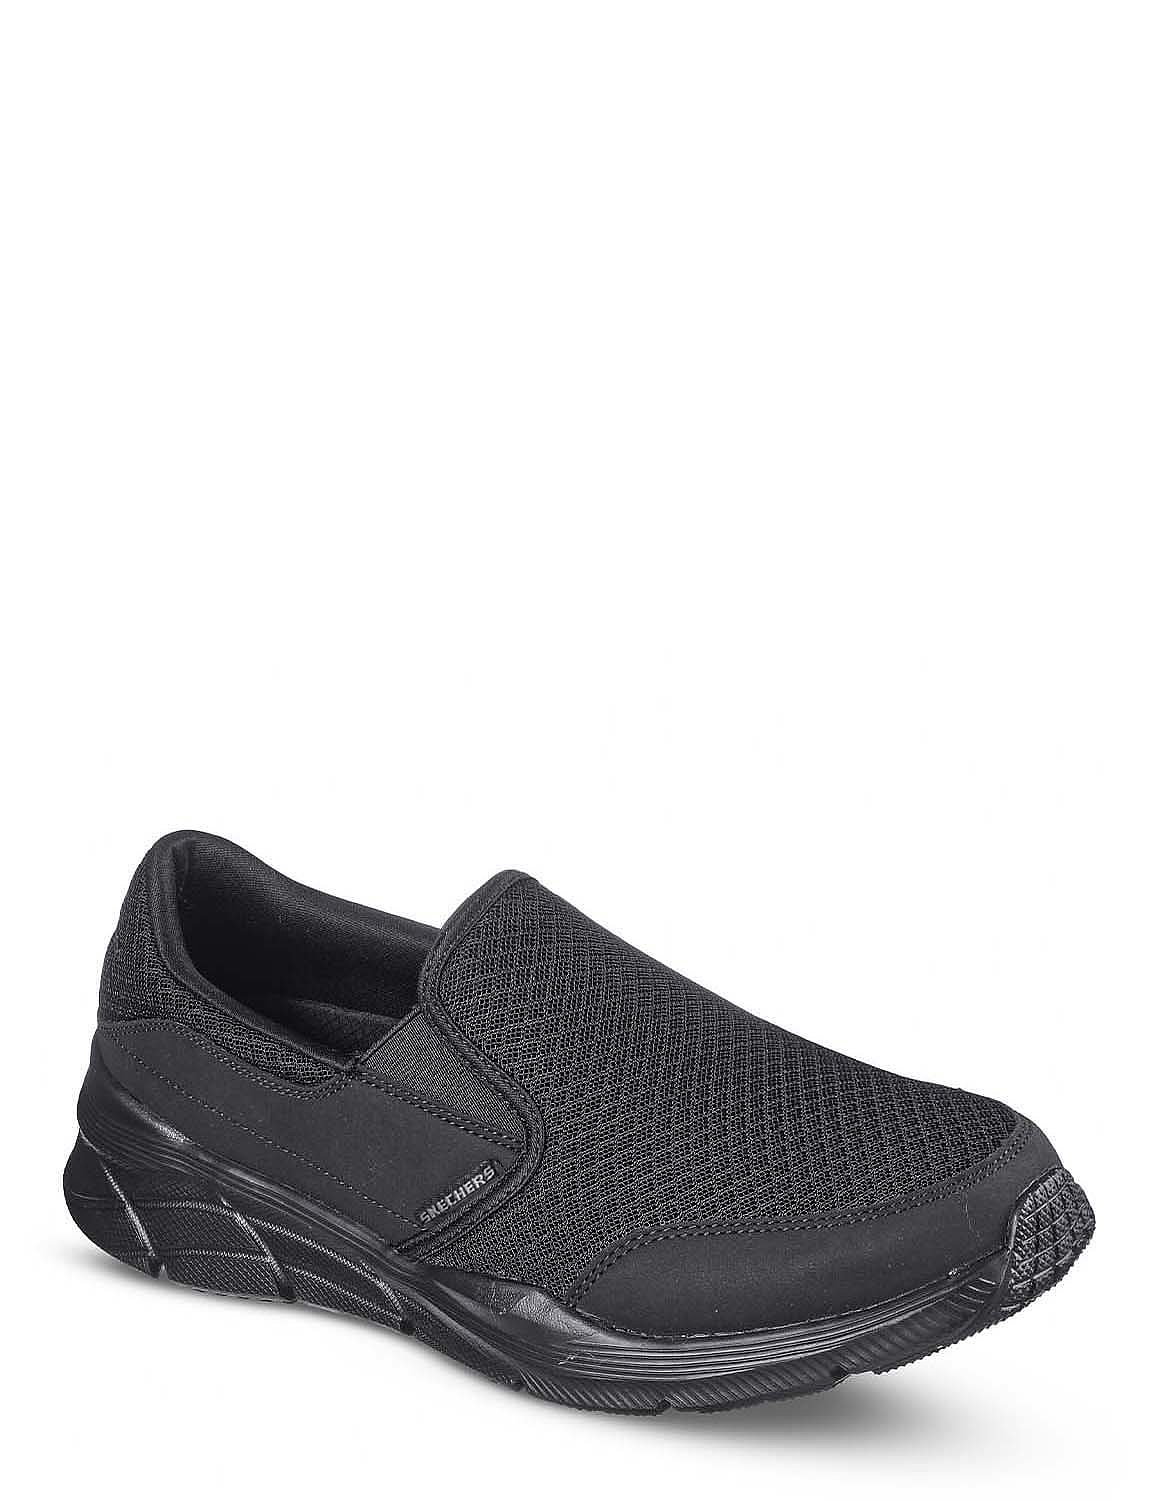 Skechers Equalizer 4.0 Extra Wide Fit Slip On Trainers | Chums